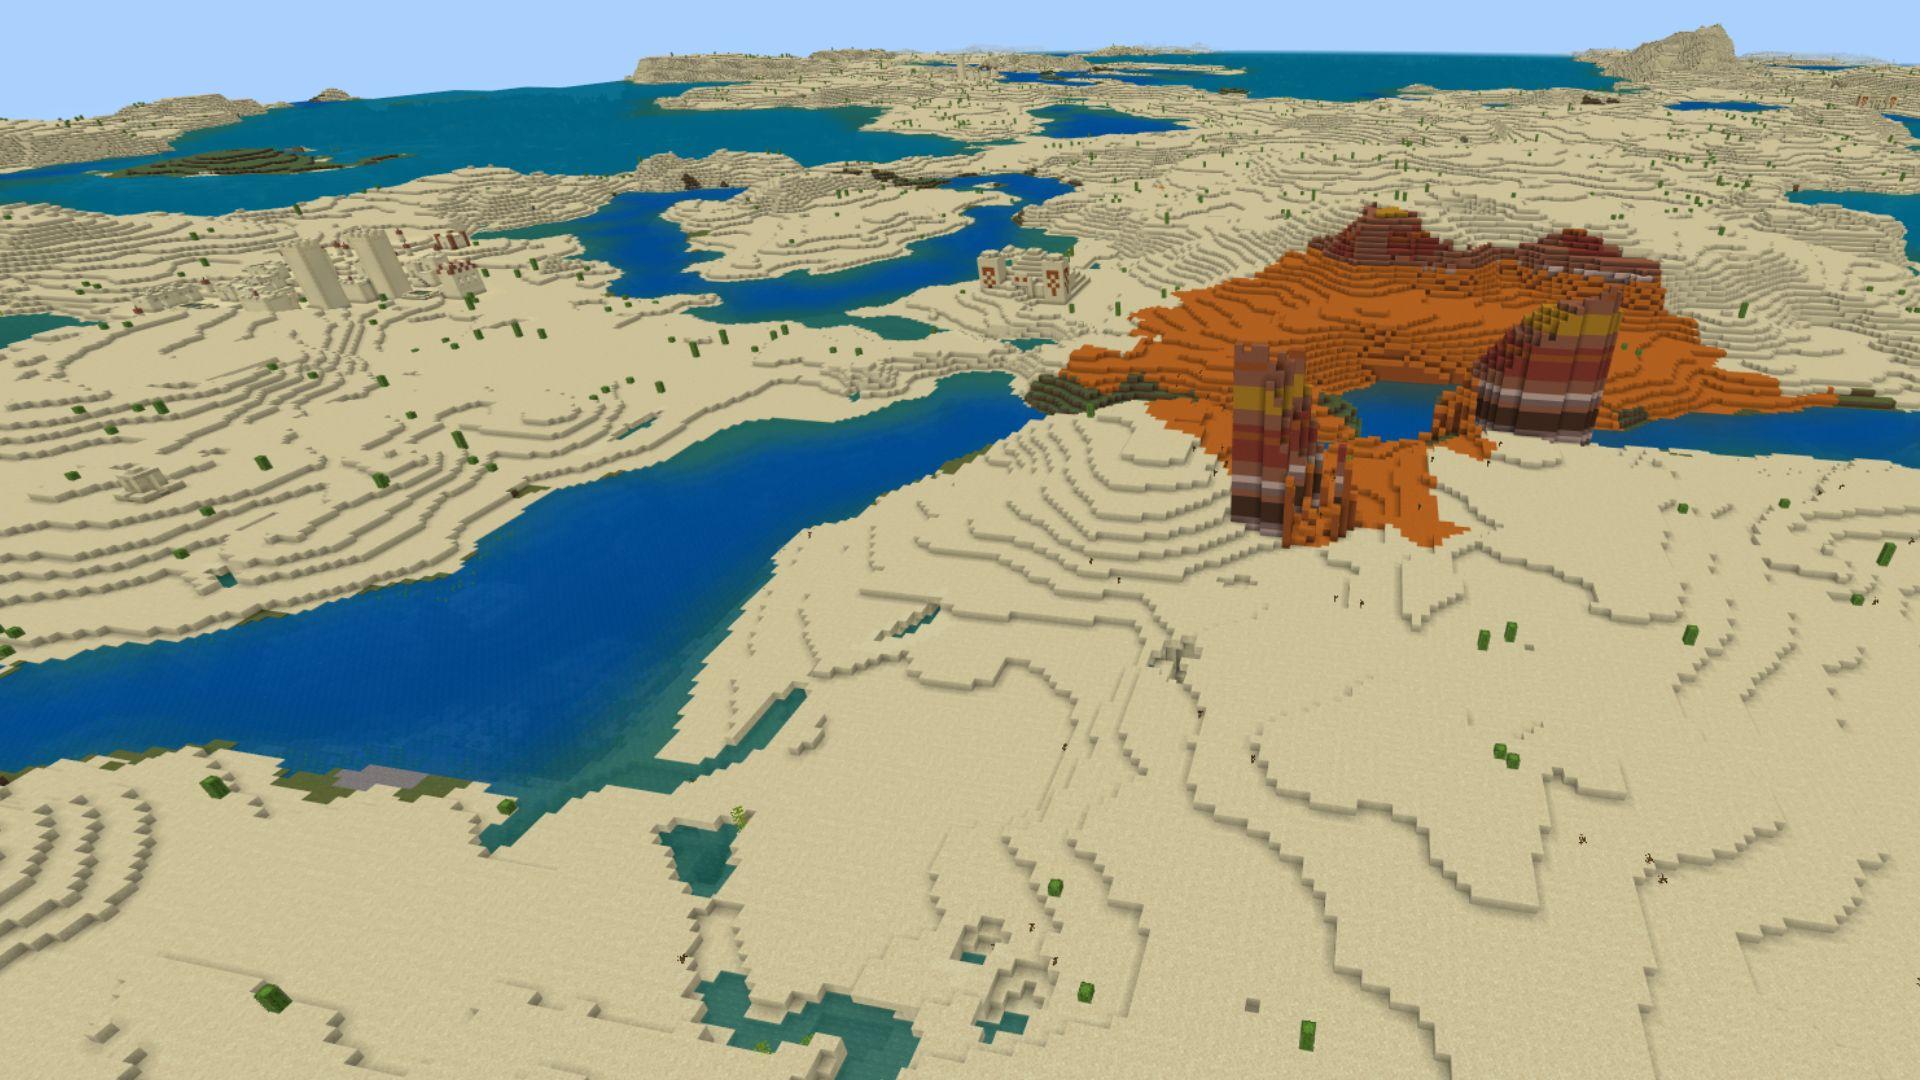 Minecrat desert with reefs, mesa and more